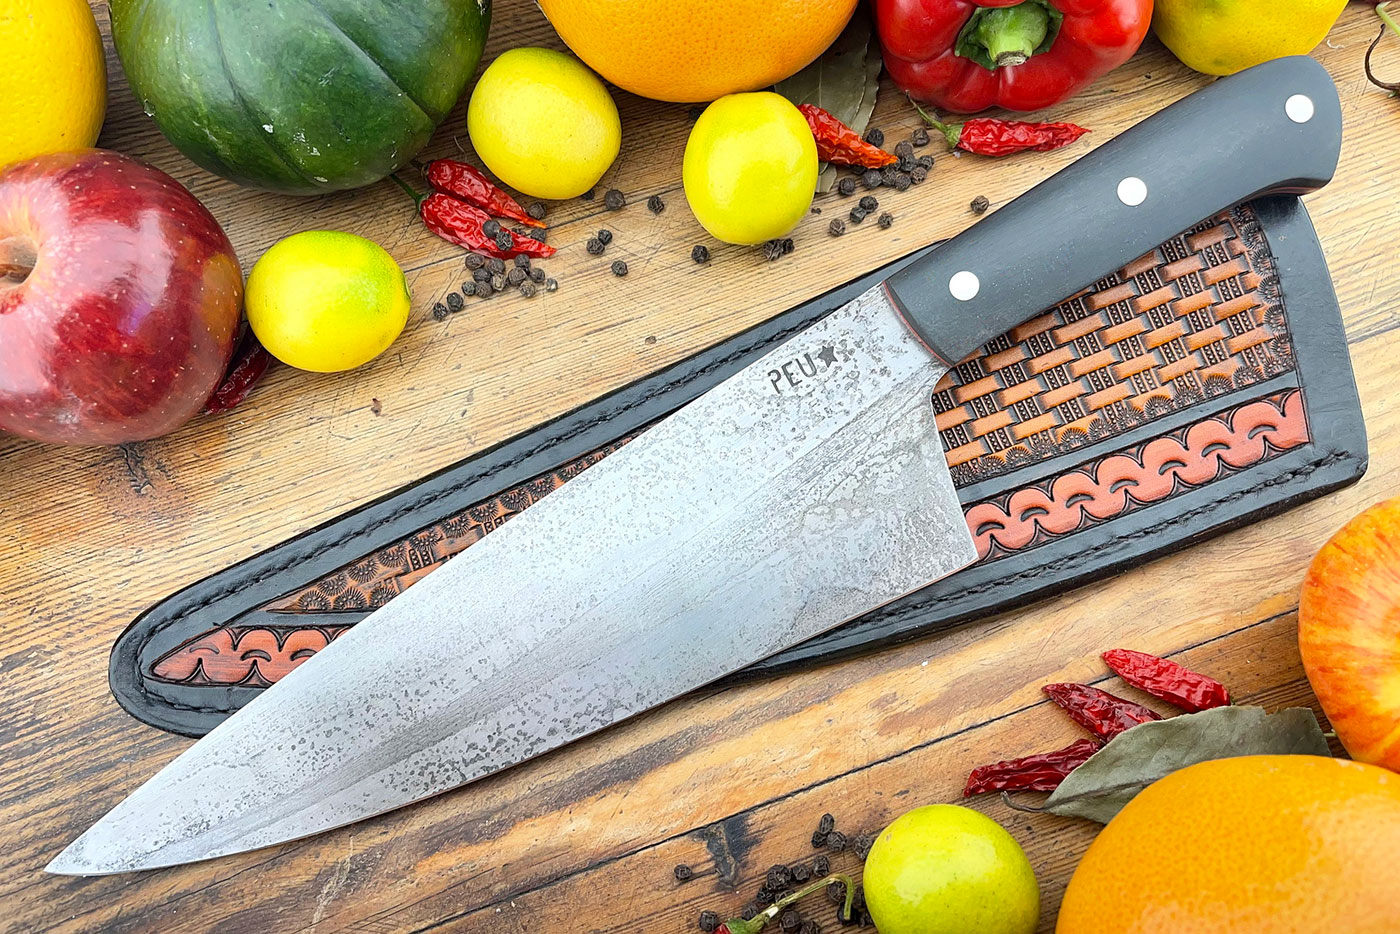 Chef's Knife (Cocinero 210mm) with Black Micarta and O2 Carbon Steel